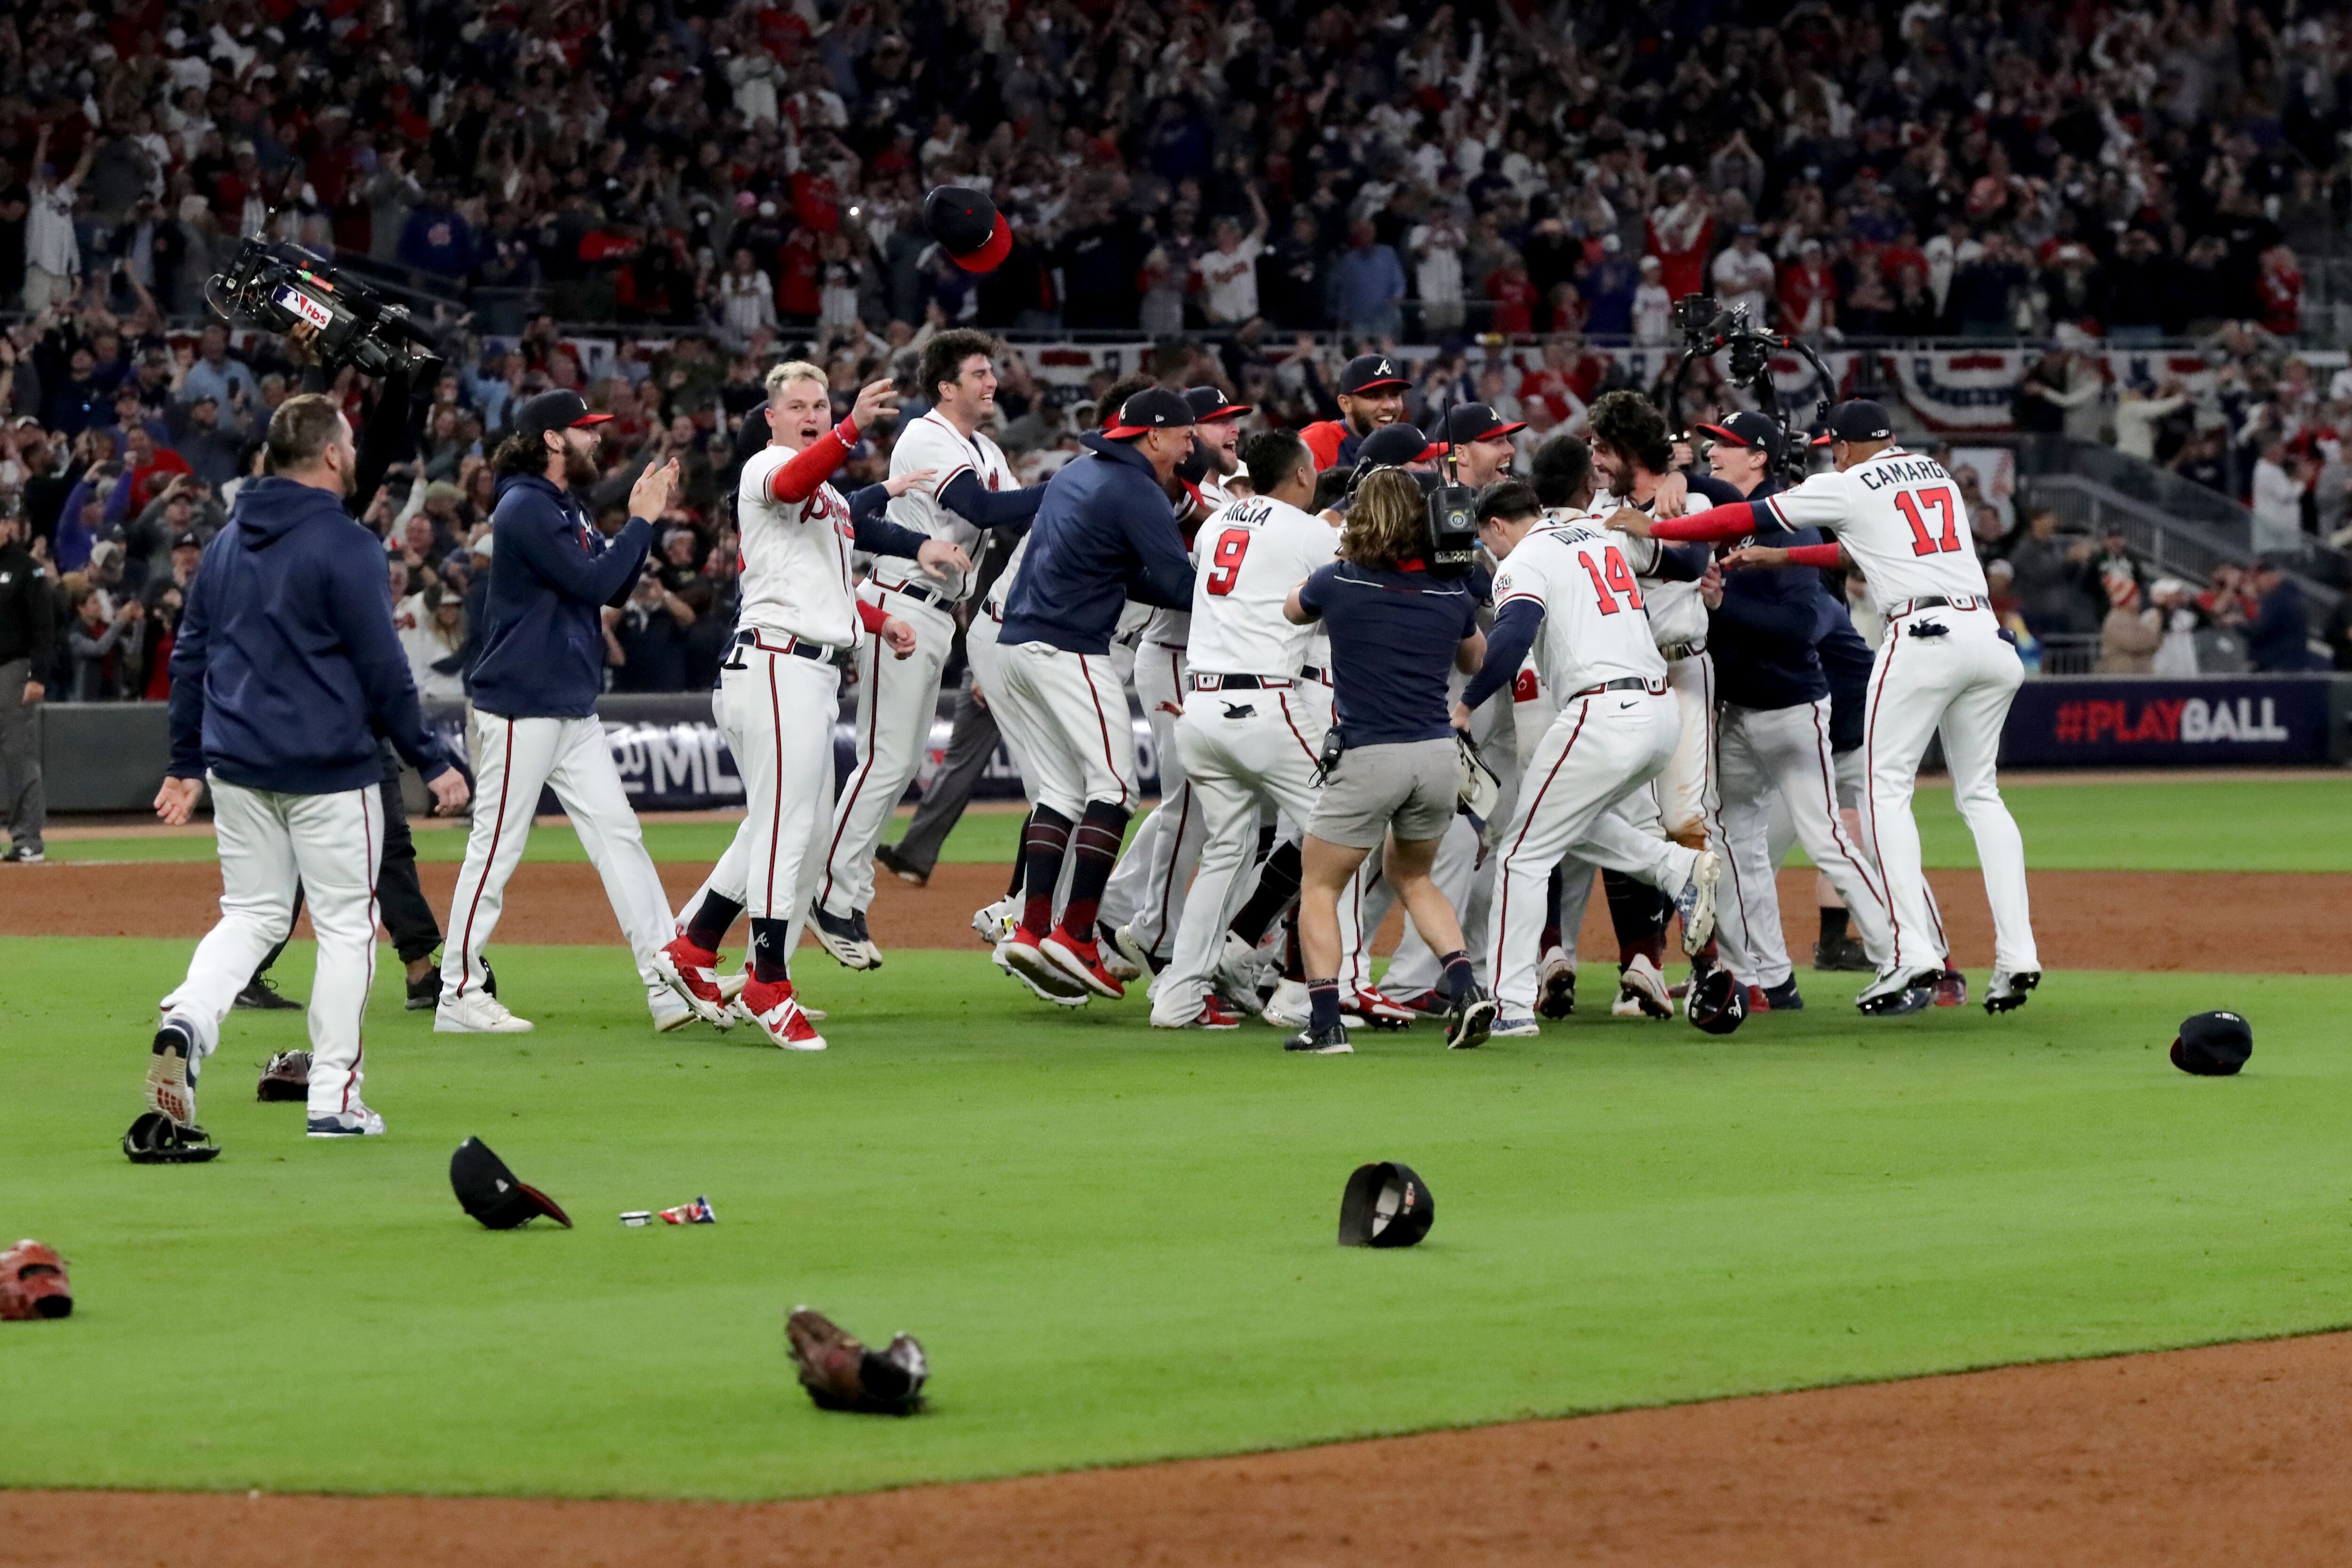 Late-night magic: Braves beat Dodgers 5-4, lead NLCS 2-0 – KGET 17